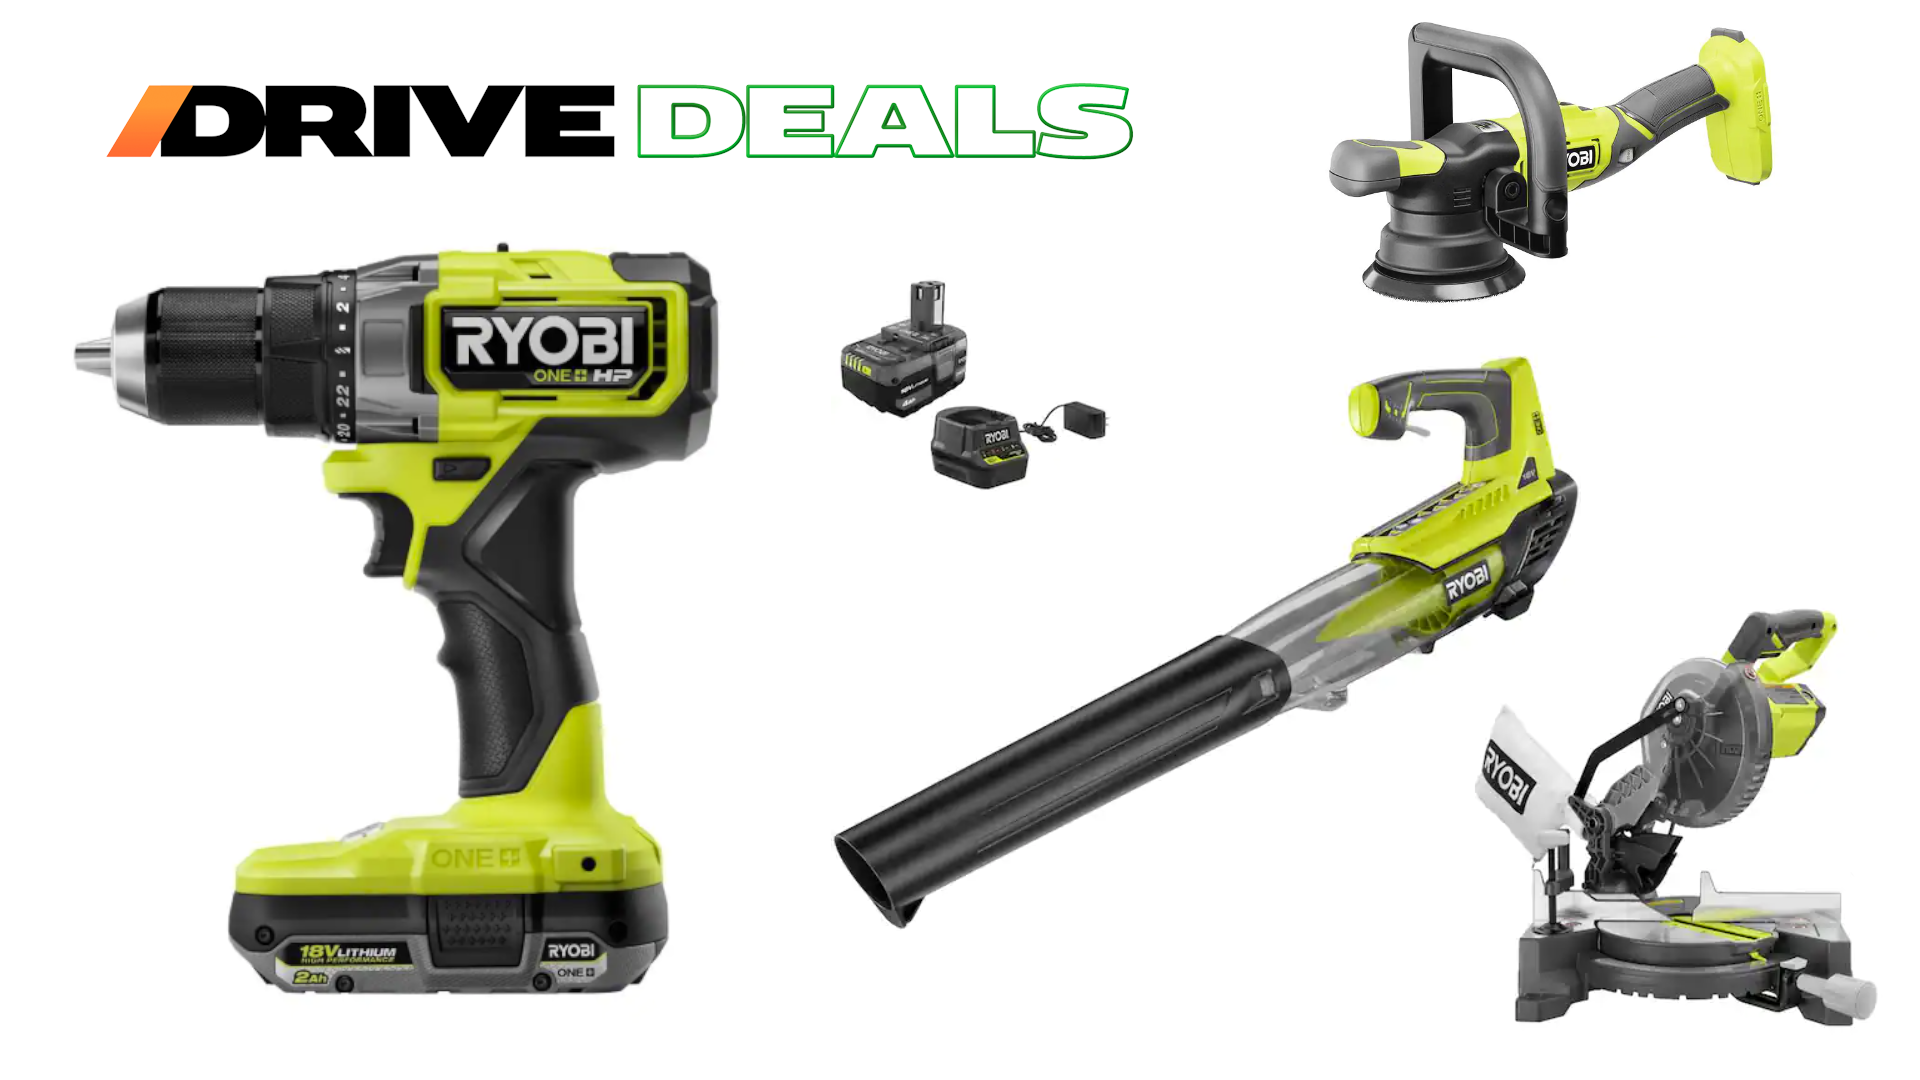 Check Out These Hot Ryobi Deals From Home Depot